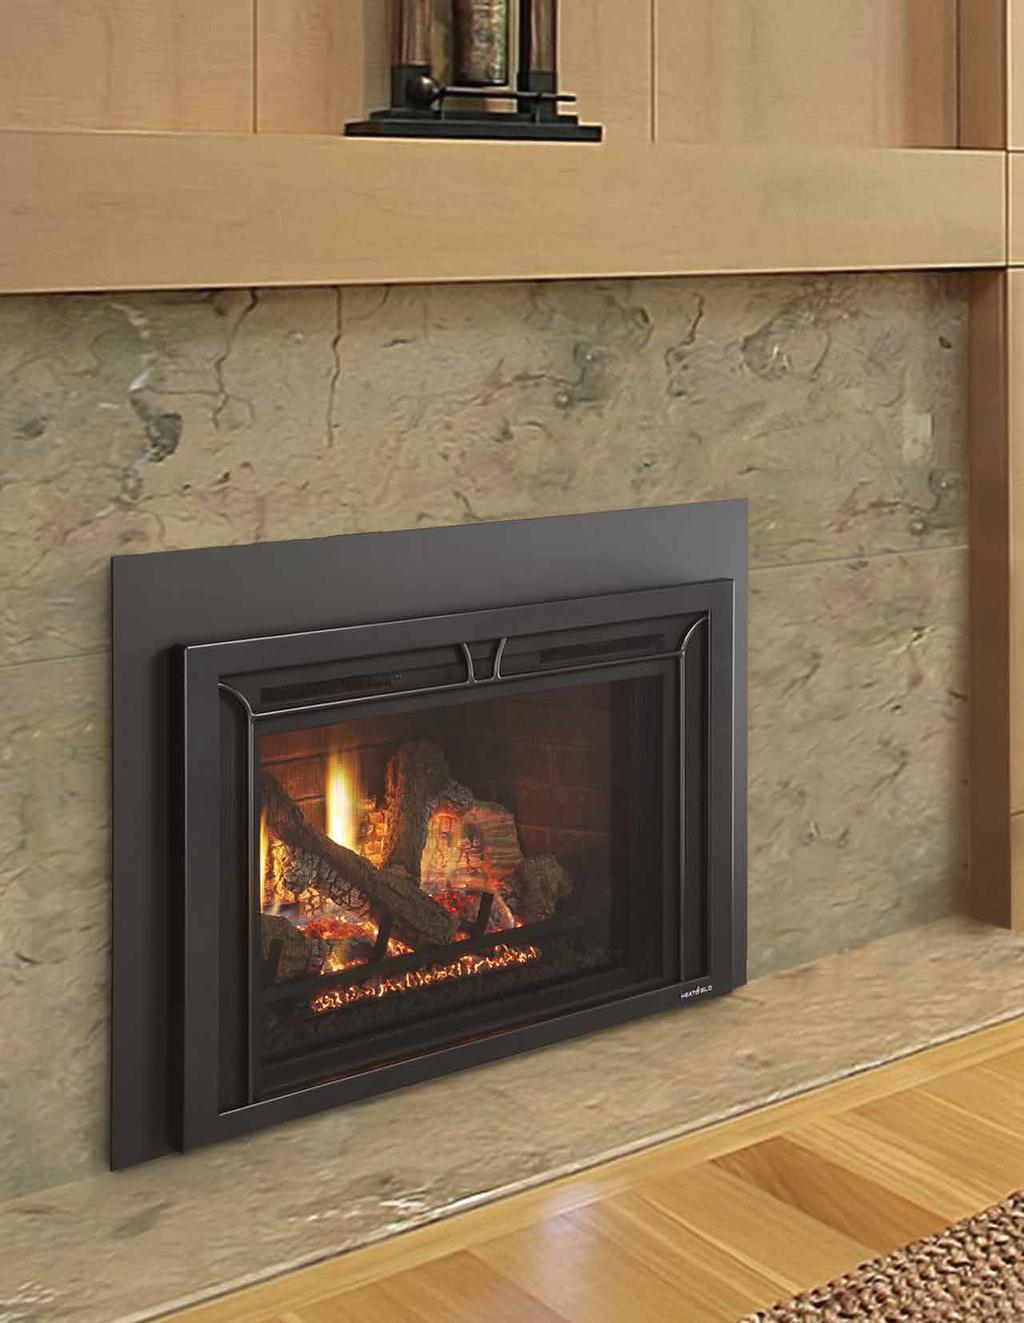 Firebrick Inserts Inspired Innovations Fireplace inserts fit directly inside existing fireplaces and can immediately upgrade a space.